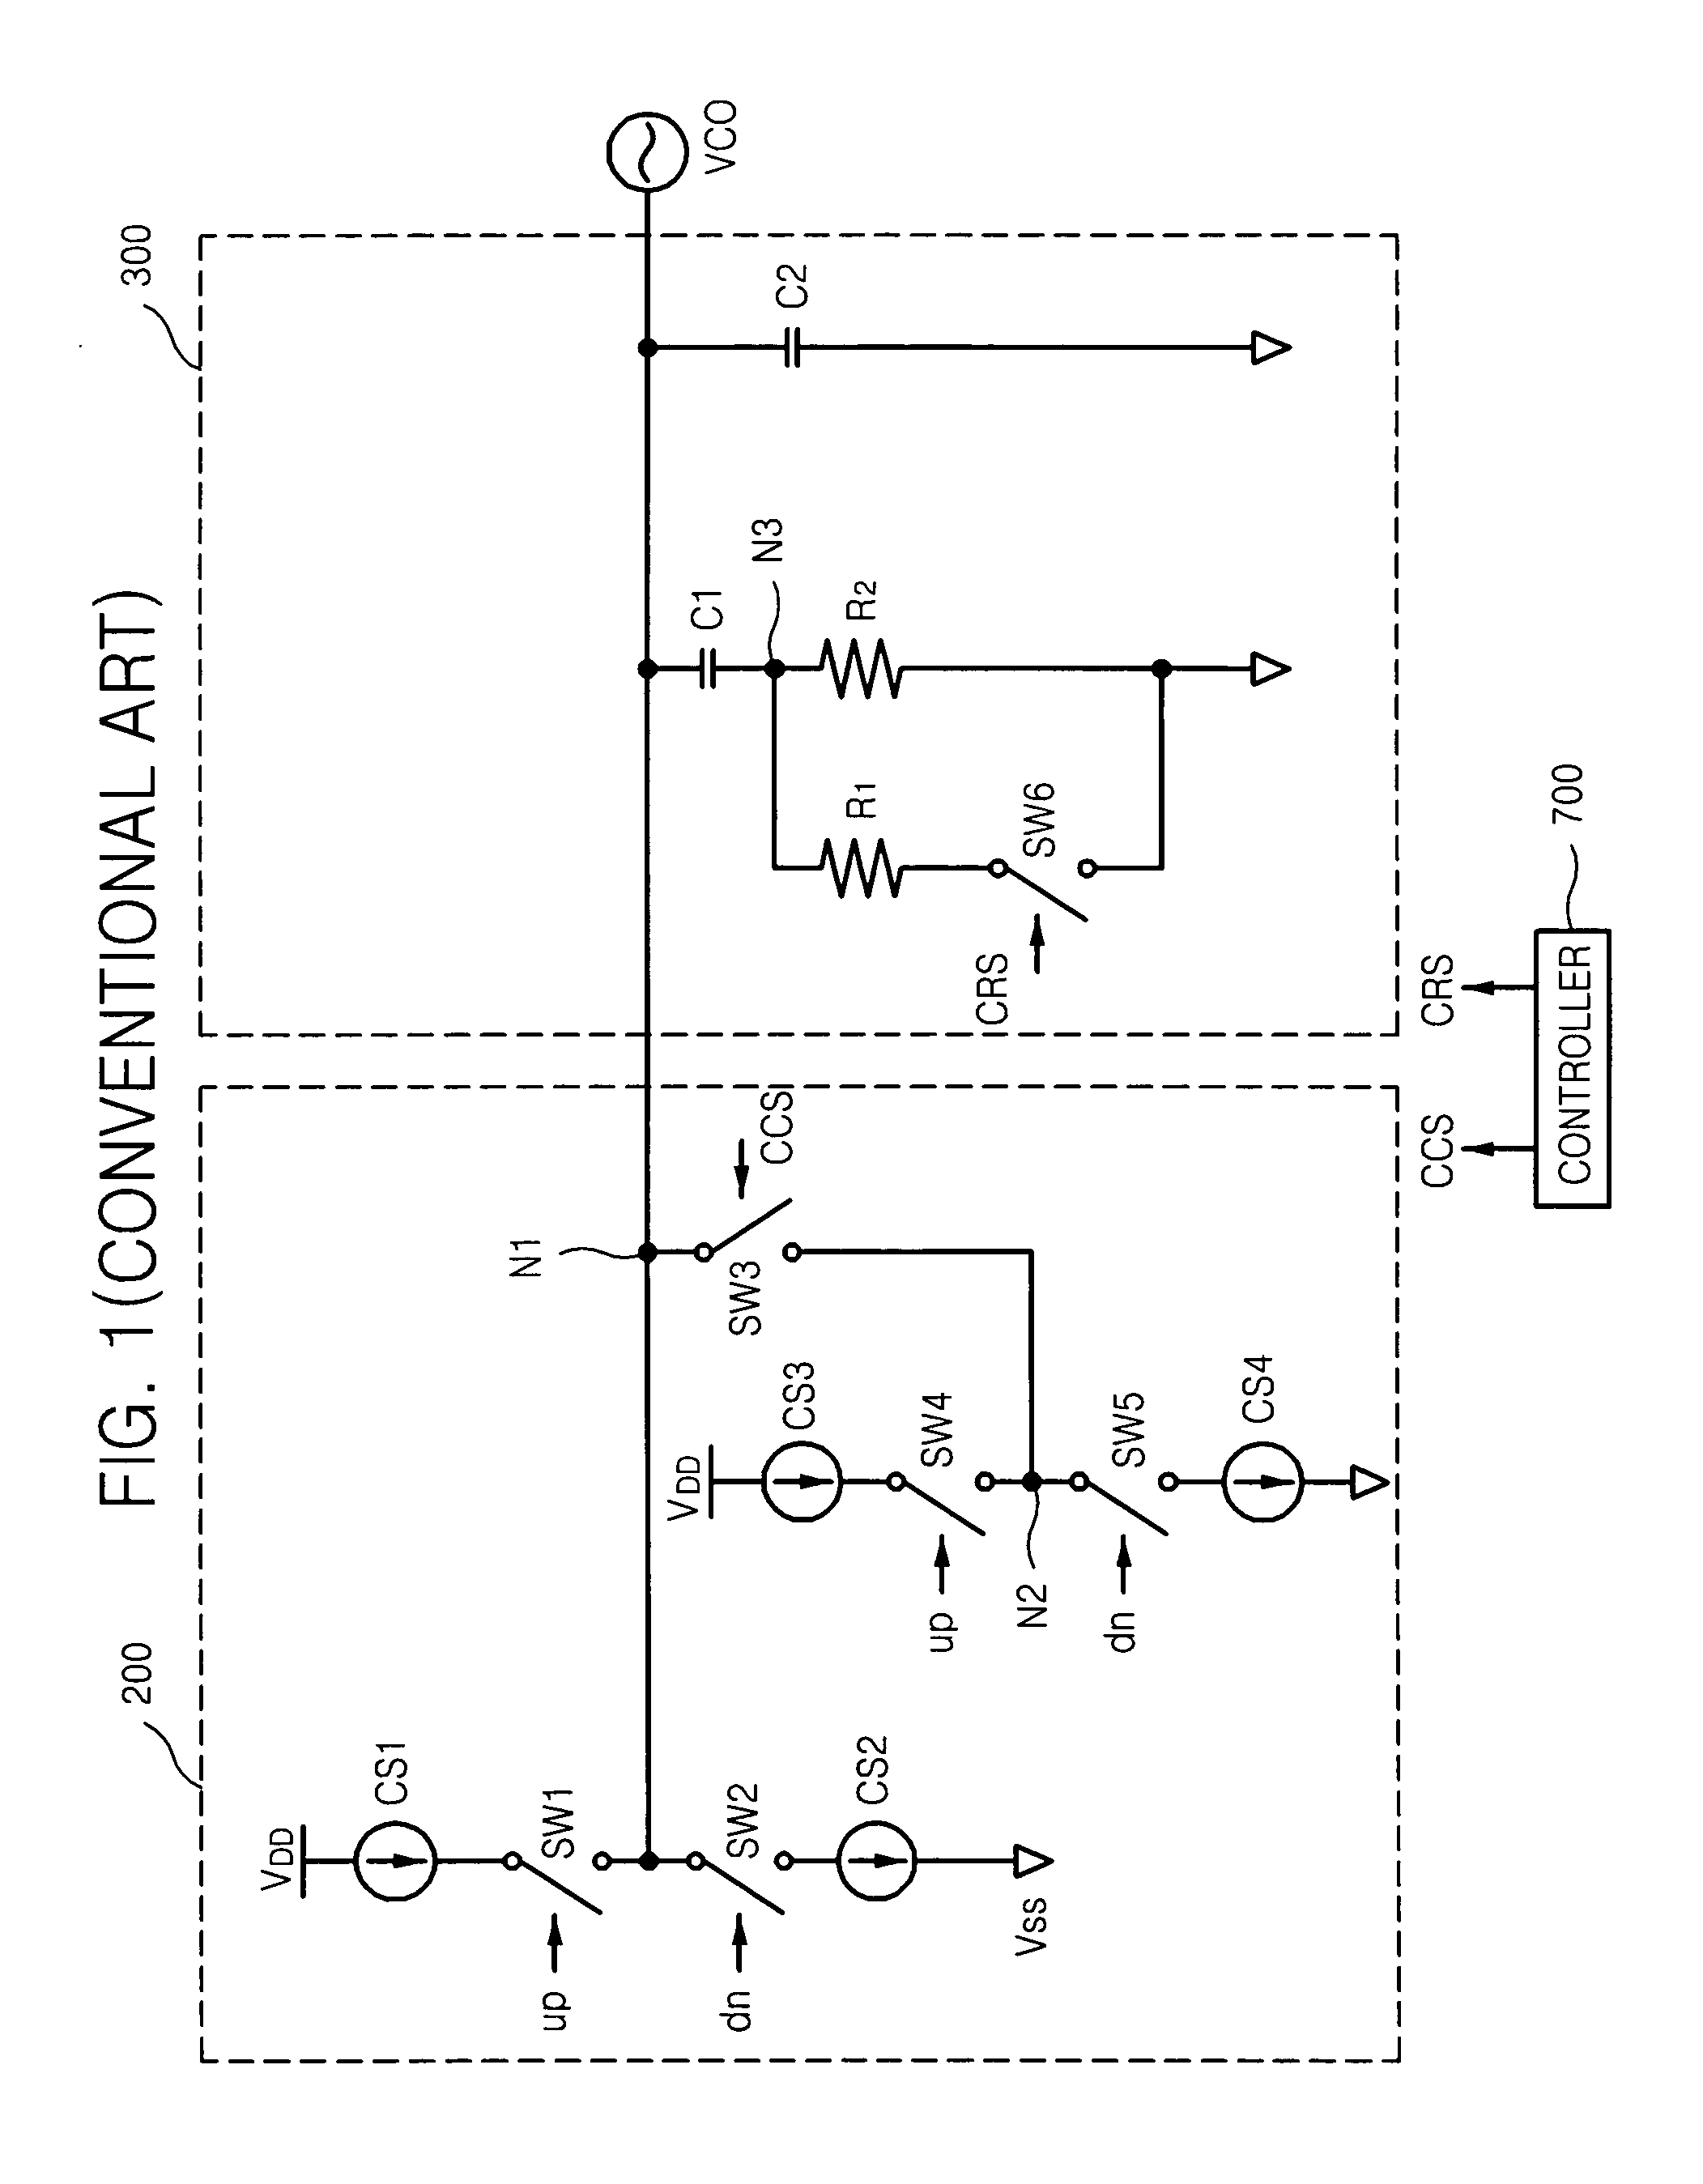 Sigma-delta fractional-N PLL with reduced frequency error